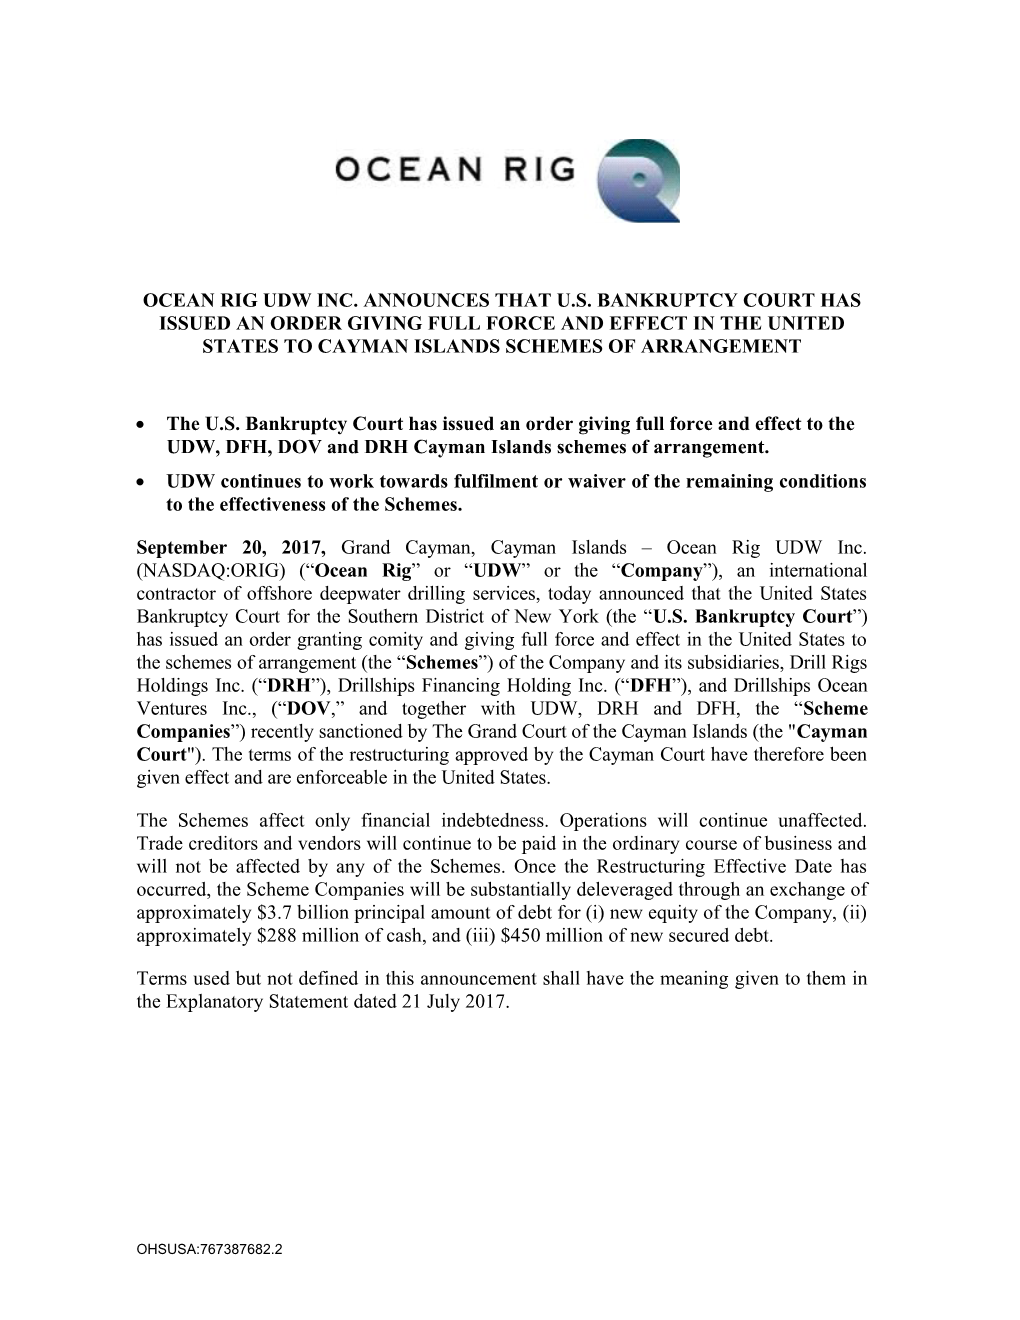 Ocean Rig Udw Inc. Announces That U.S. Bankruptcy Court Has Issued an Order Giving Full